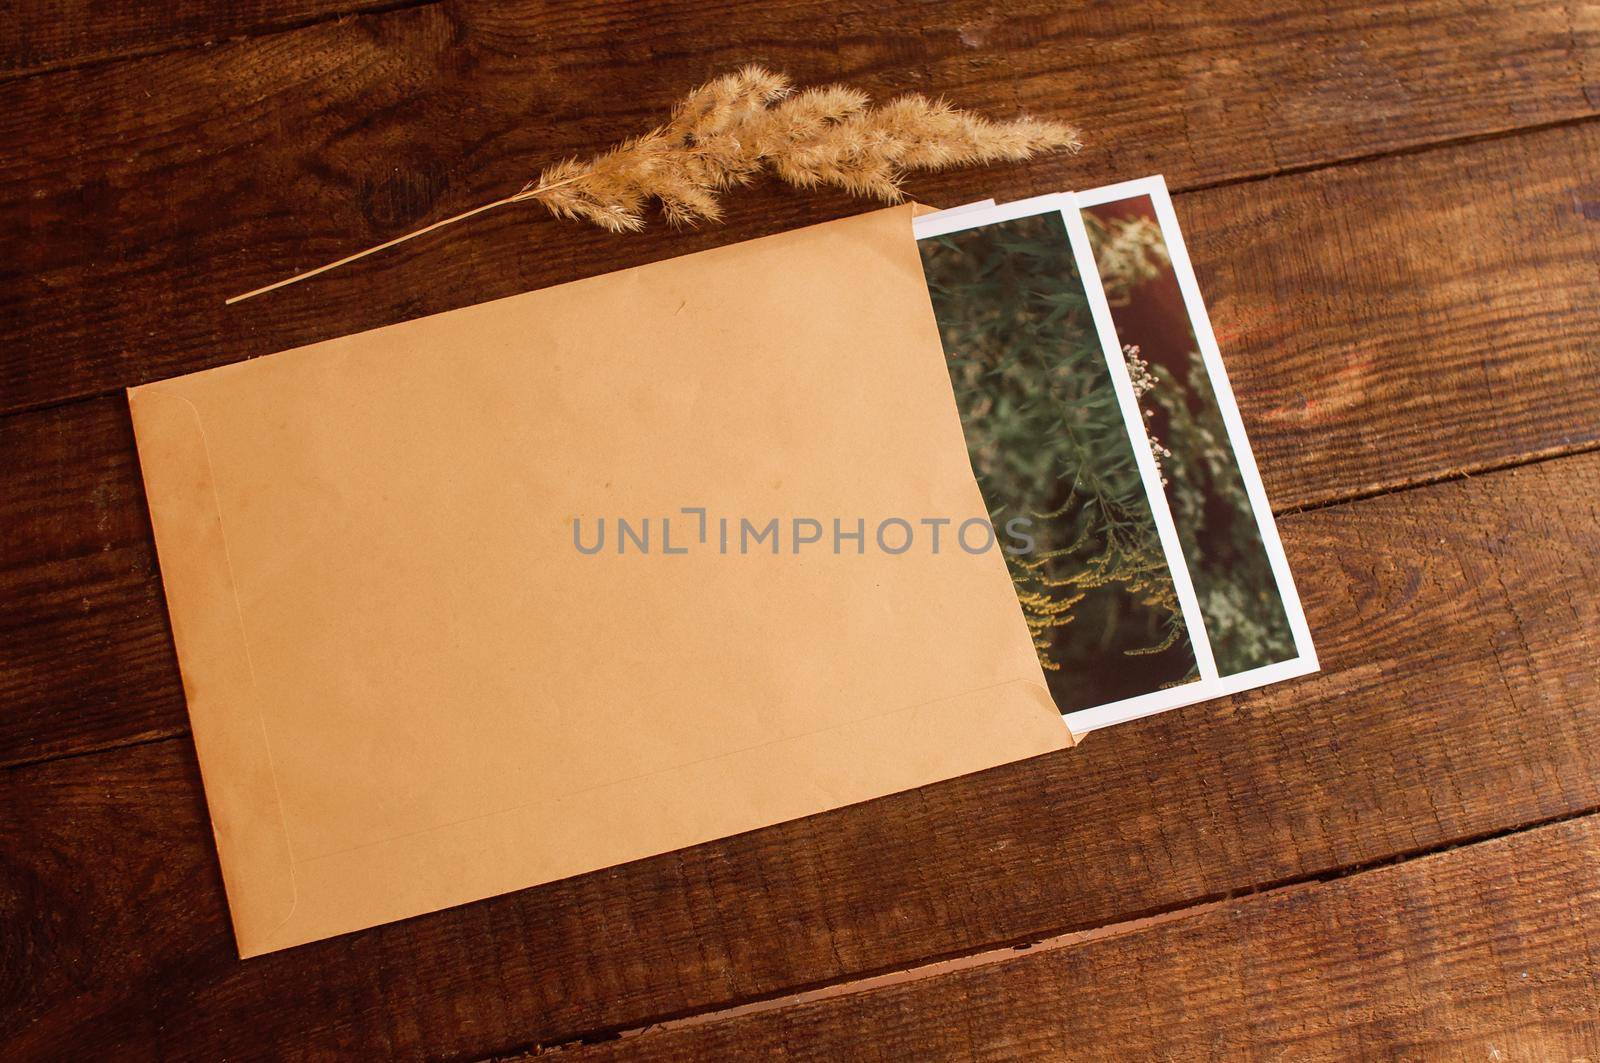 photos are enclosed in a beige envelope by ozornina